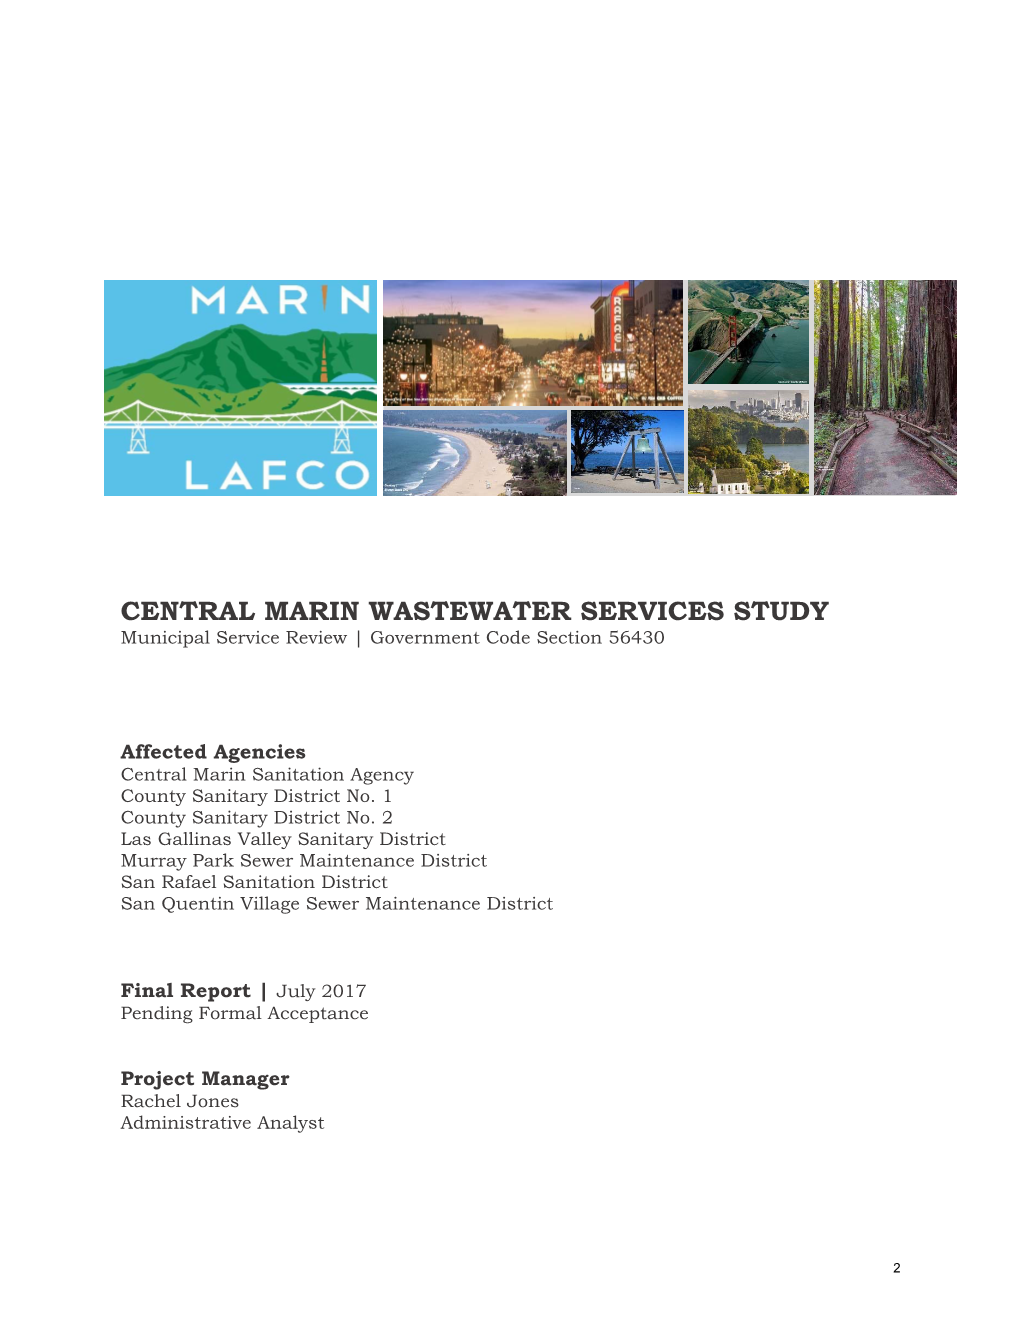 CENTRAL MARIN WASTEWATER SERVICES STUDY Municipal Service Review | Government Code Section 56430